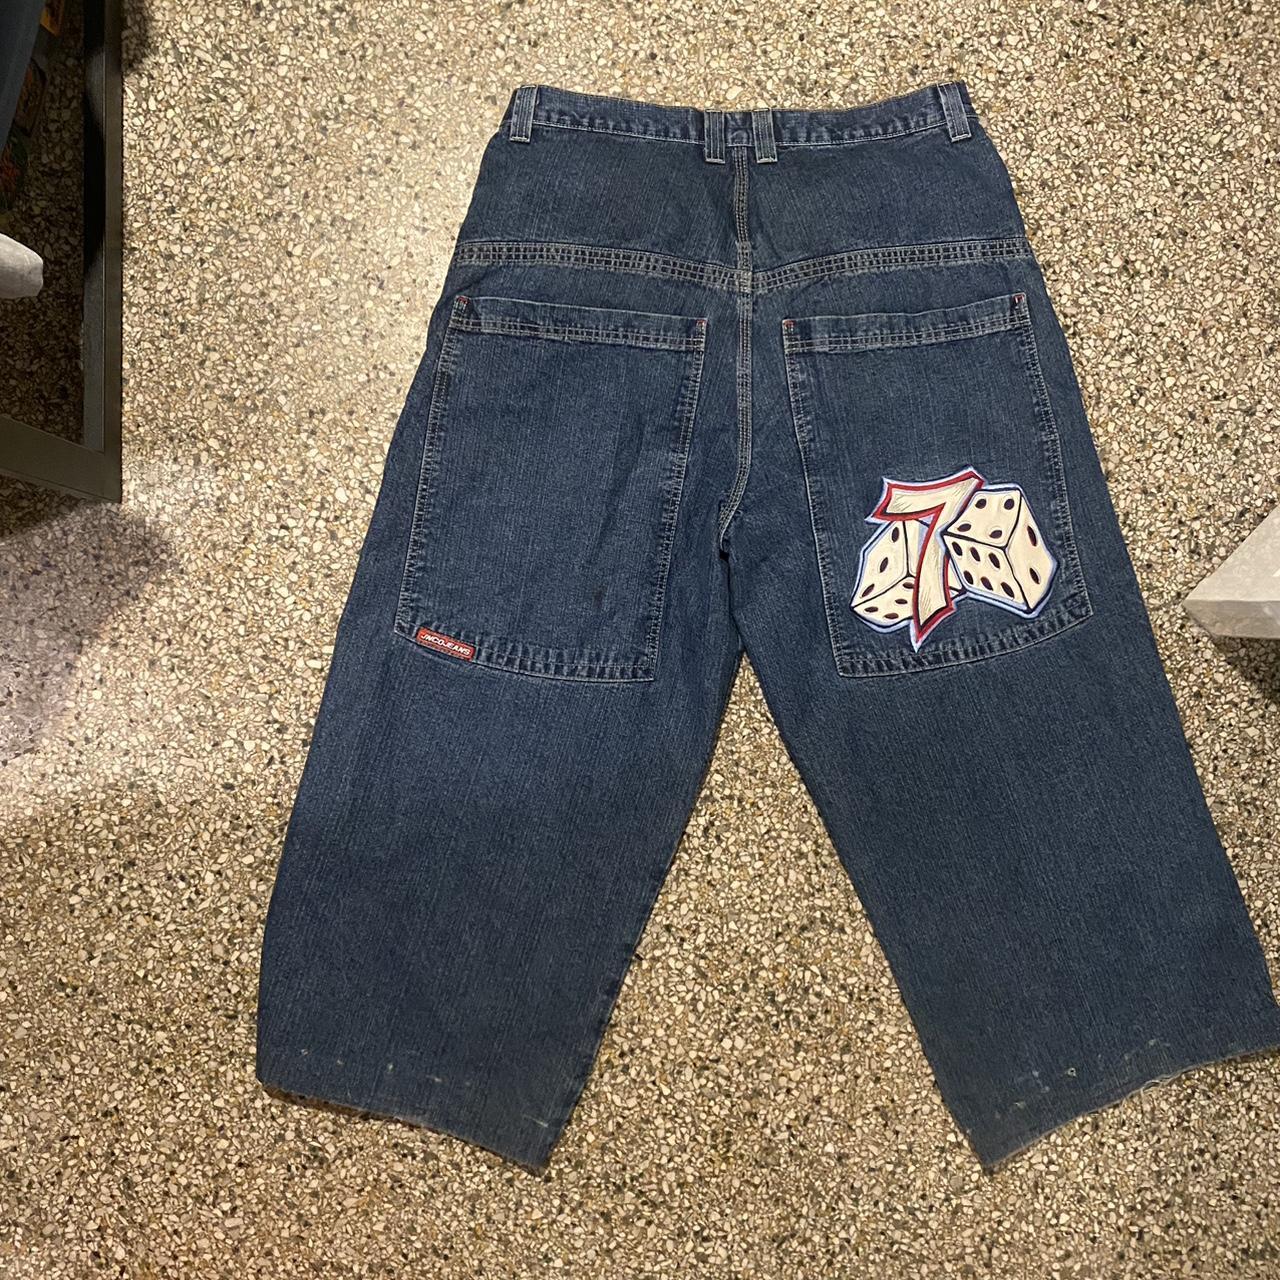 Rare one of one complete grails jnco dice jeans so... - Depop